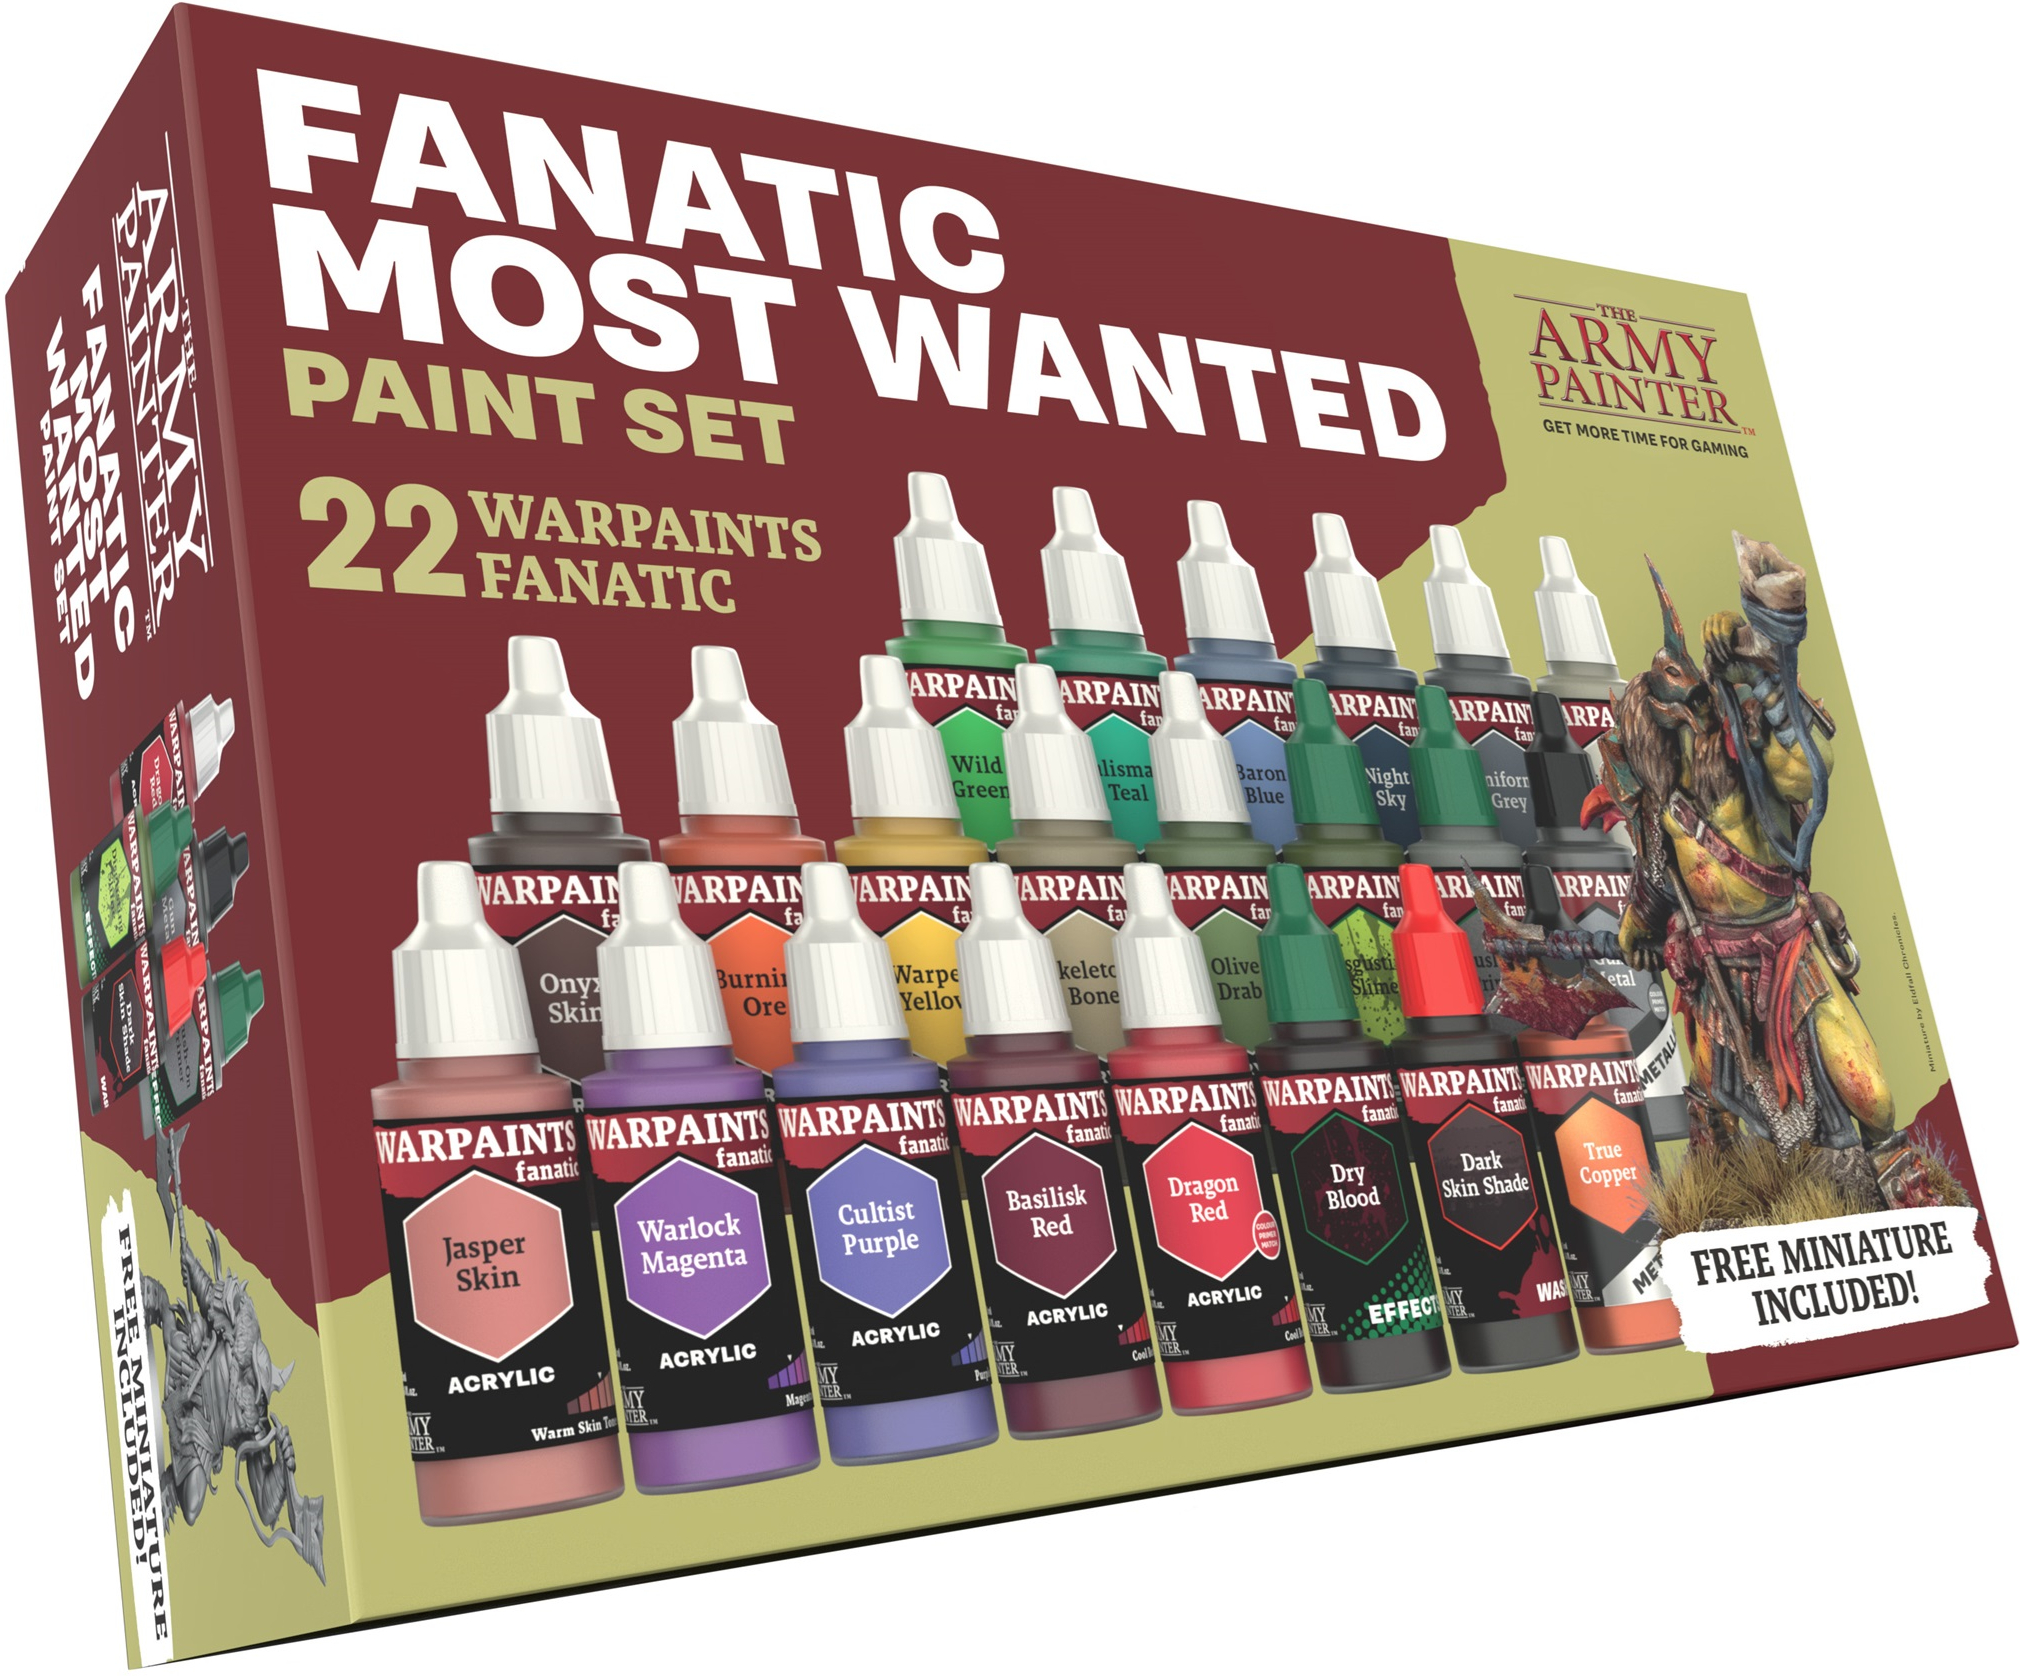 The Army Painter - Fanatic Most Wanted Set | Event Horizon Hobbies CA